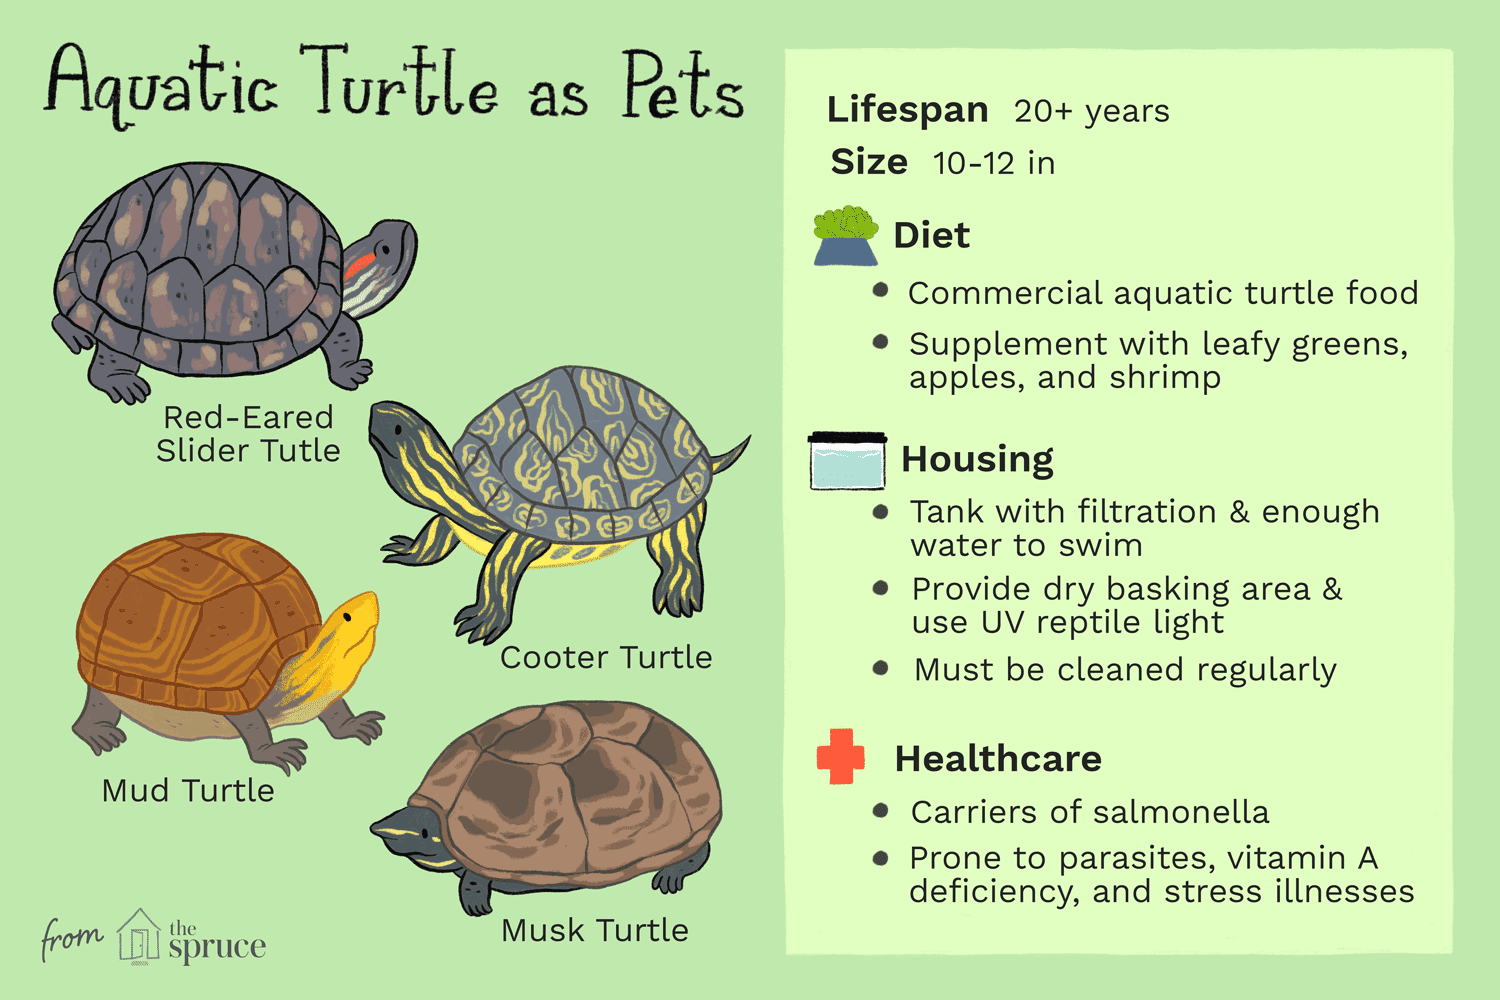 Are Pet Turtles Hard to Take Care of